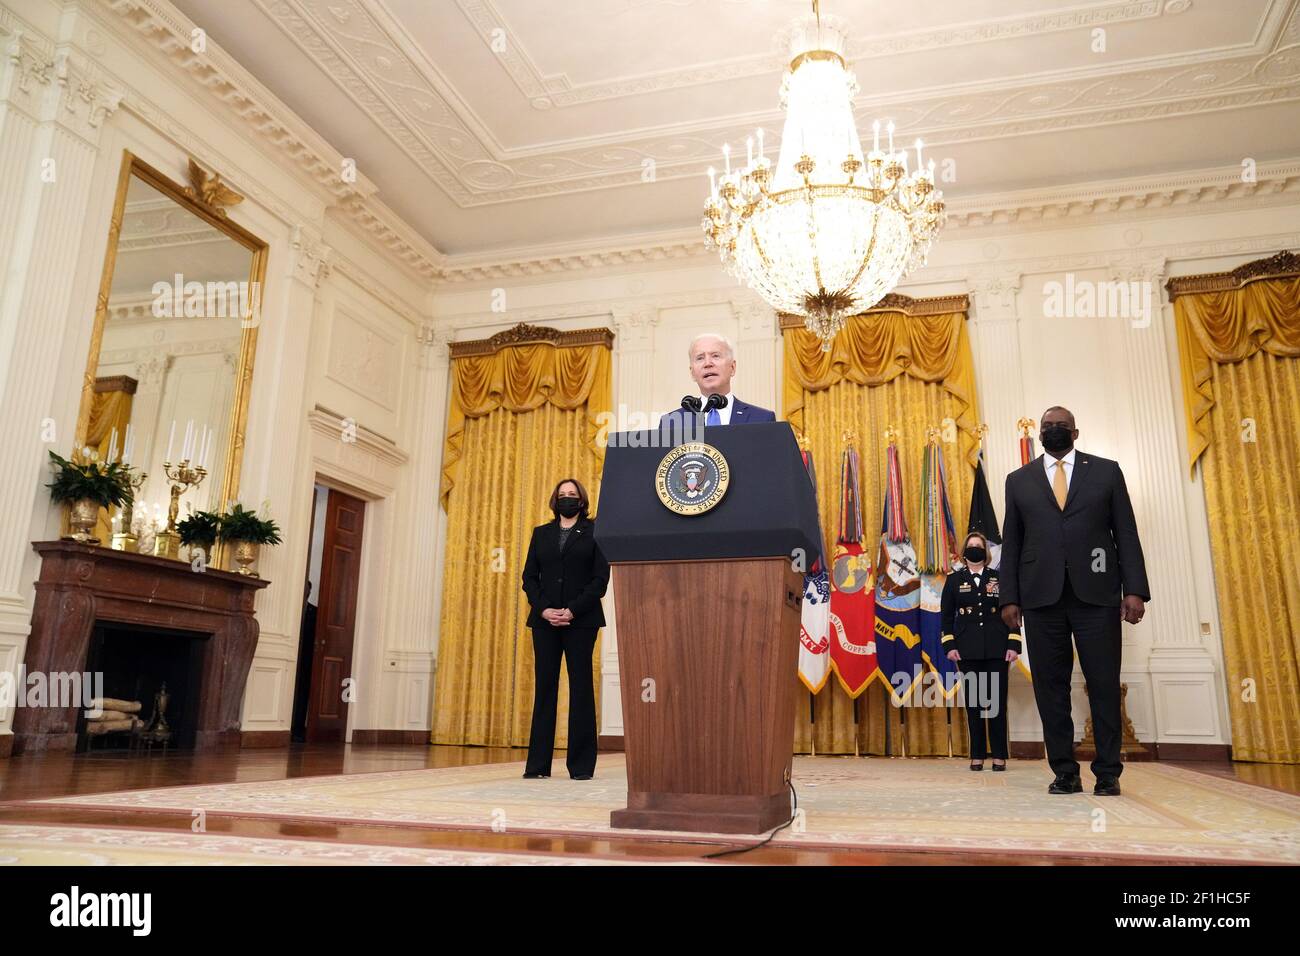 Washington, United States. 08th Mar, 2021. President Joe Biden delivers remarks at a Combatant Commander nomination event for, Air Force Gen. Jacqueline Van Ovost and Army Lt. Gen. Laura Richardson in the East Room at the White House in Washington, DC on Monday, March 8, 2021. Ovost, has been nominated to lead the Transportation Command and Richardson, has been nominated to lead military activities in Latin America at Southern Command. Biden was joined by Vice President Kamala Harris and Defense Secretary Lloyd Austin. Photo by Kevin Dietsch/UPI Credit: UPI/Alamy Live News Stock Photo